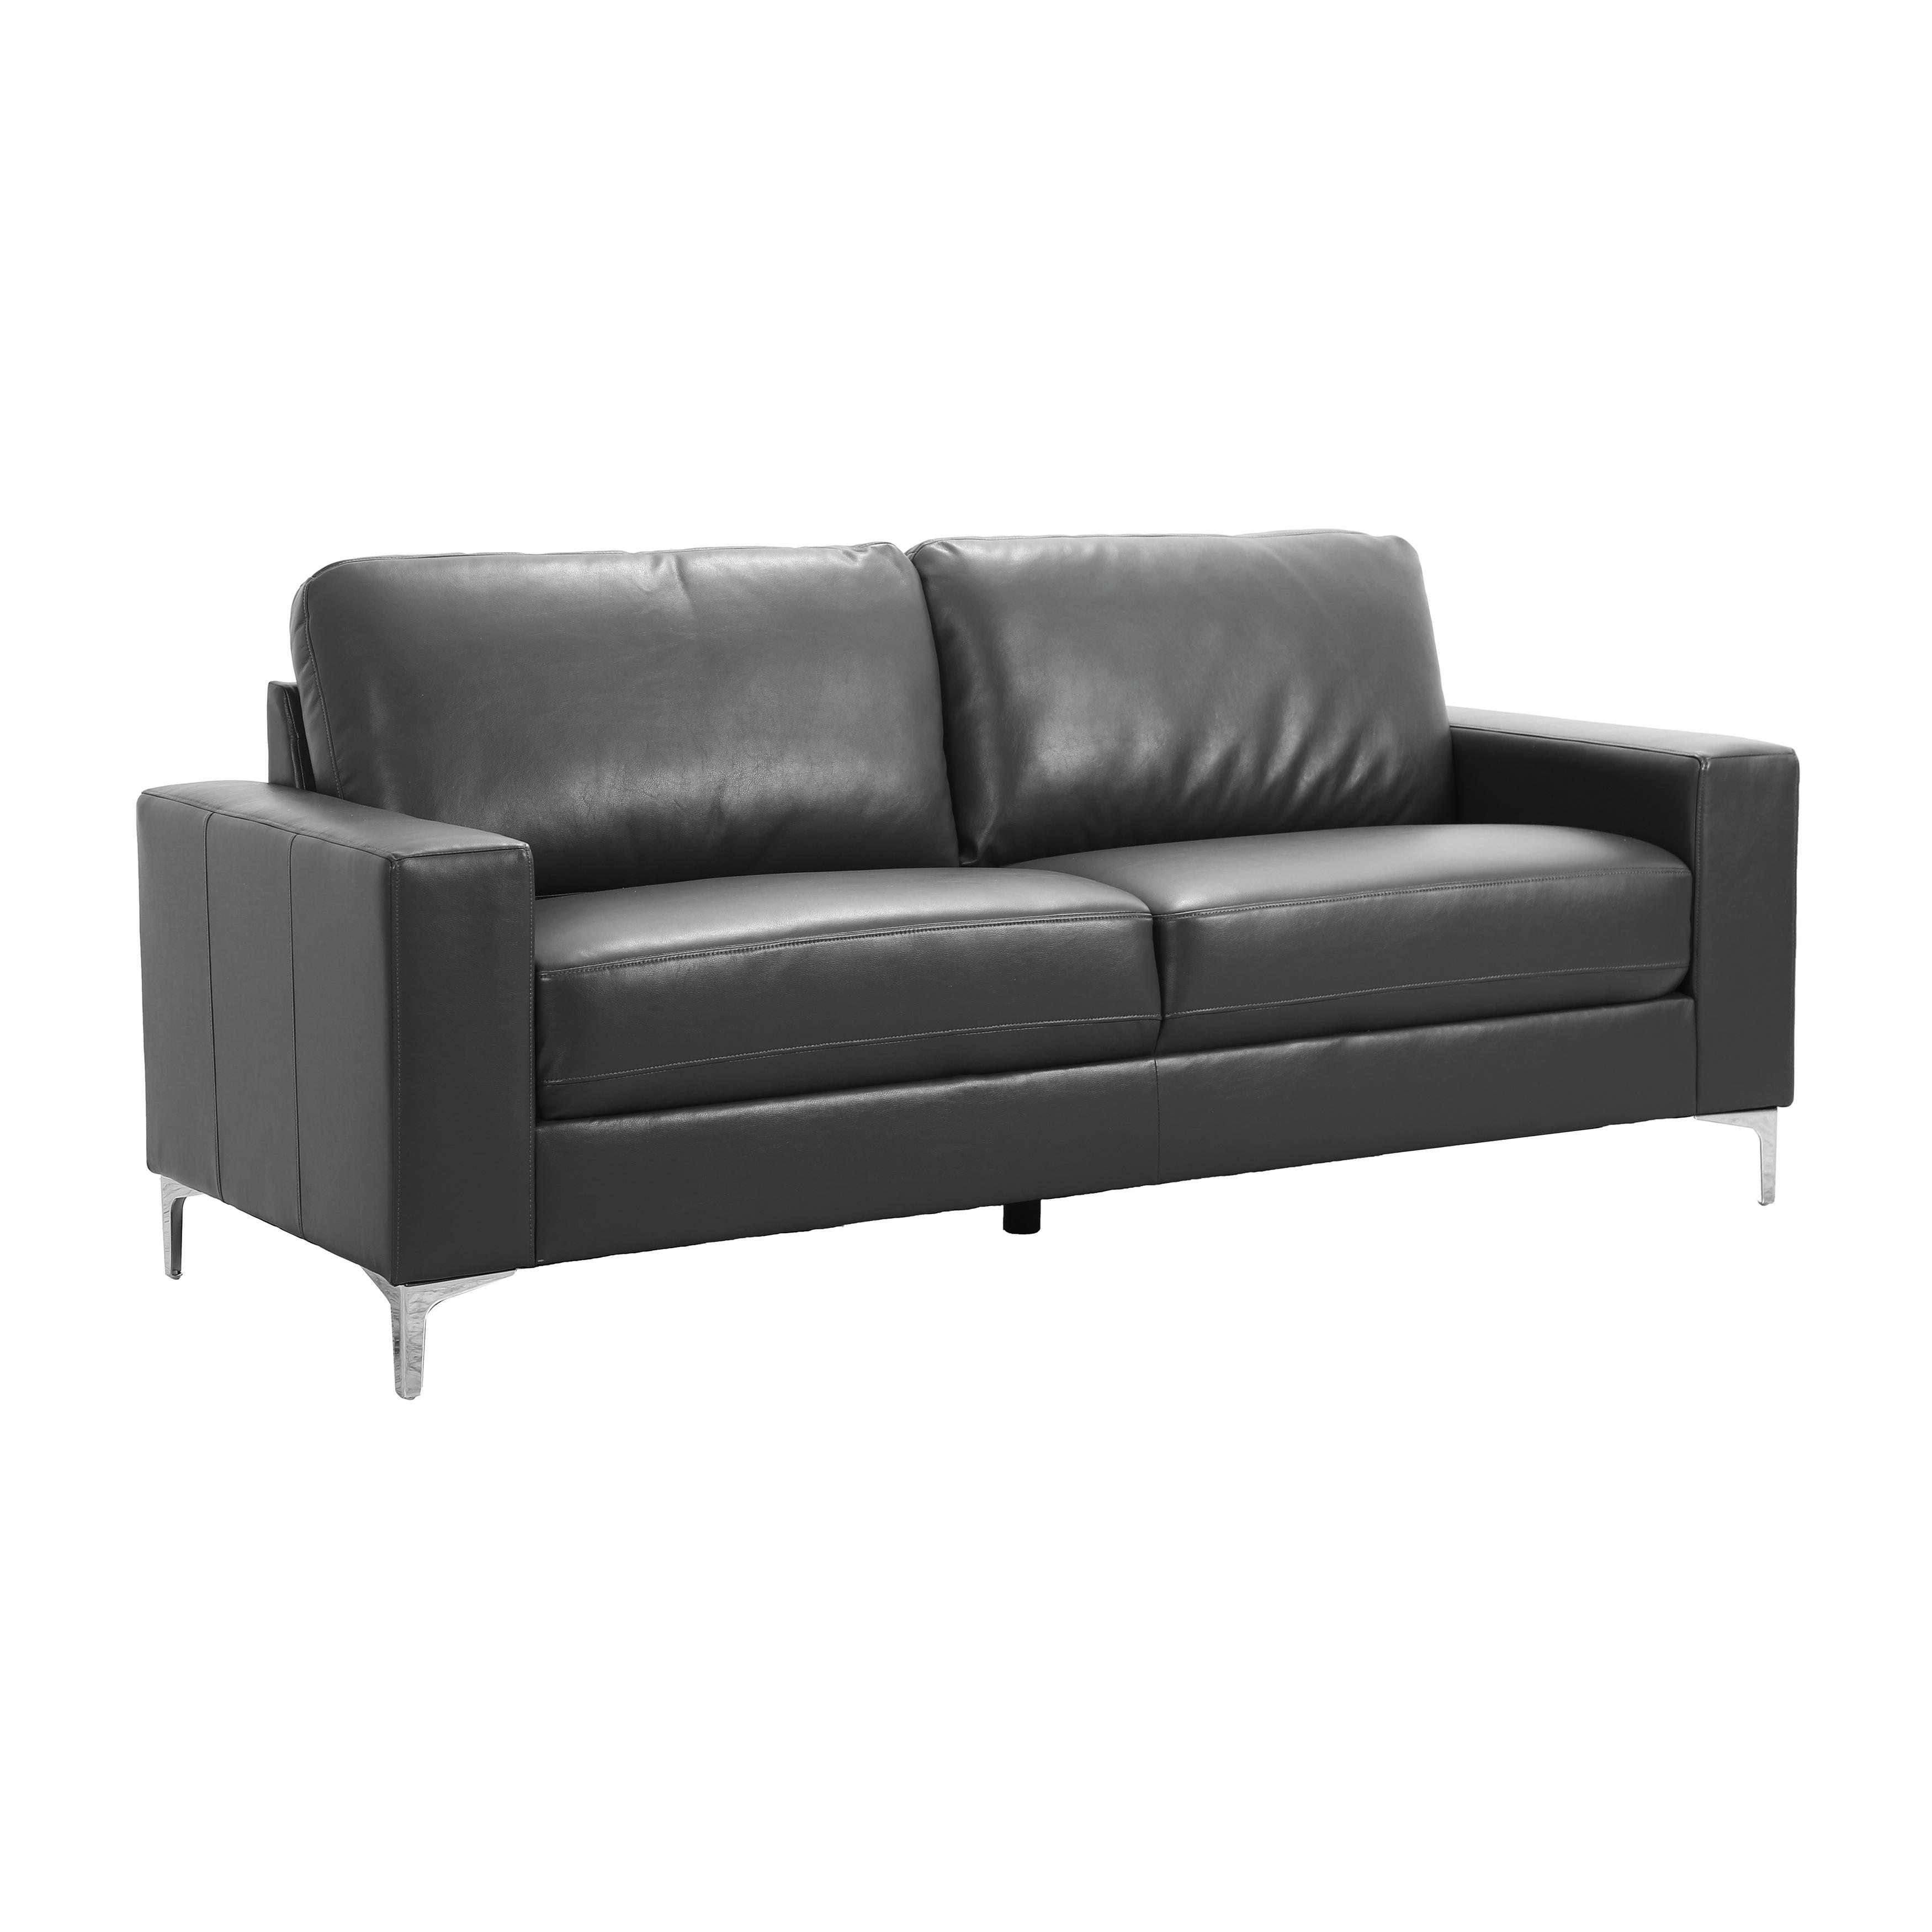 

    
Contemporary Gray Faux Leather Sofa Homelegance 8203GY-3 Iniko
